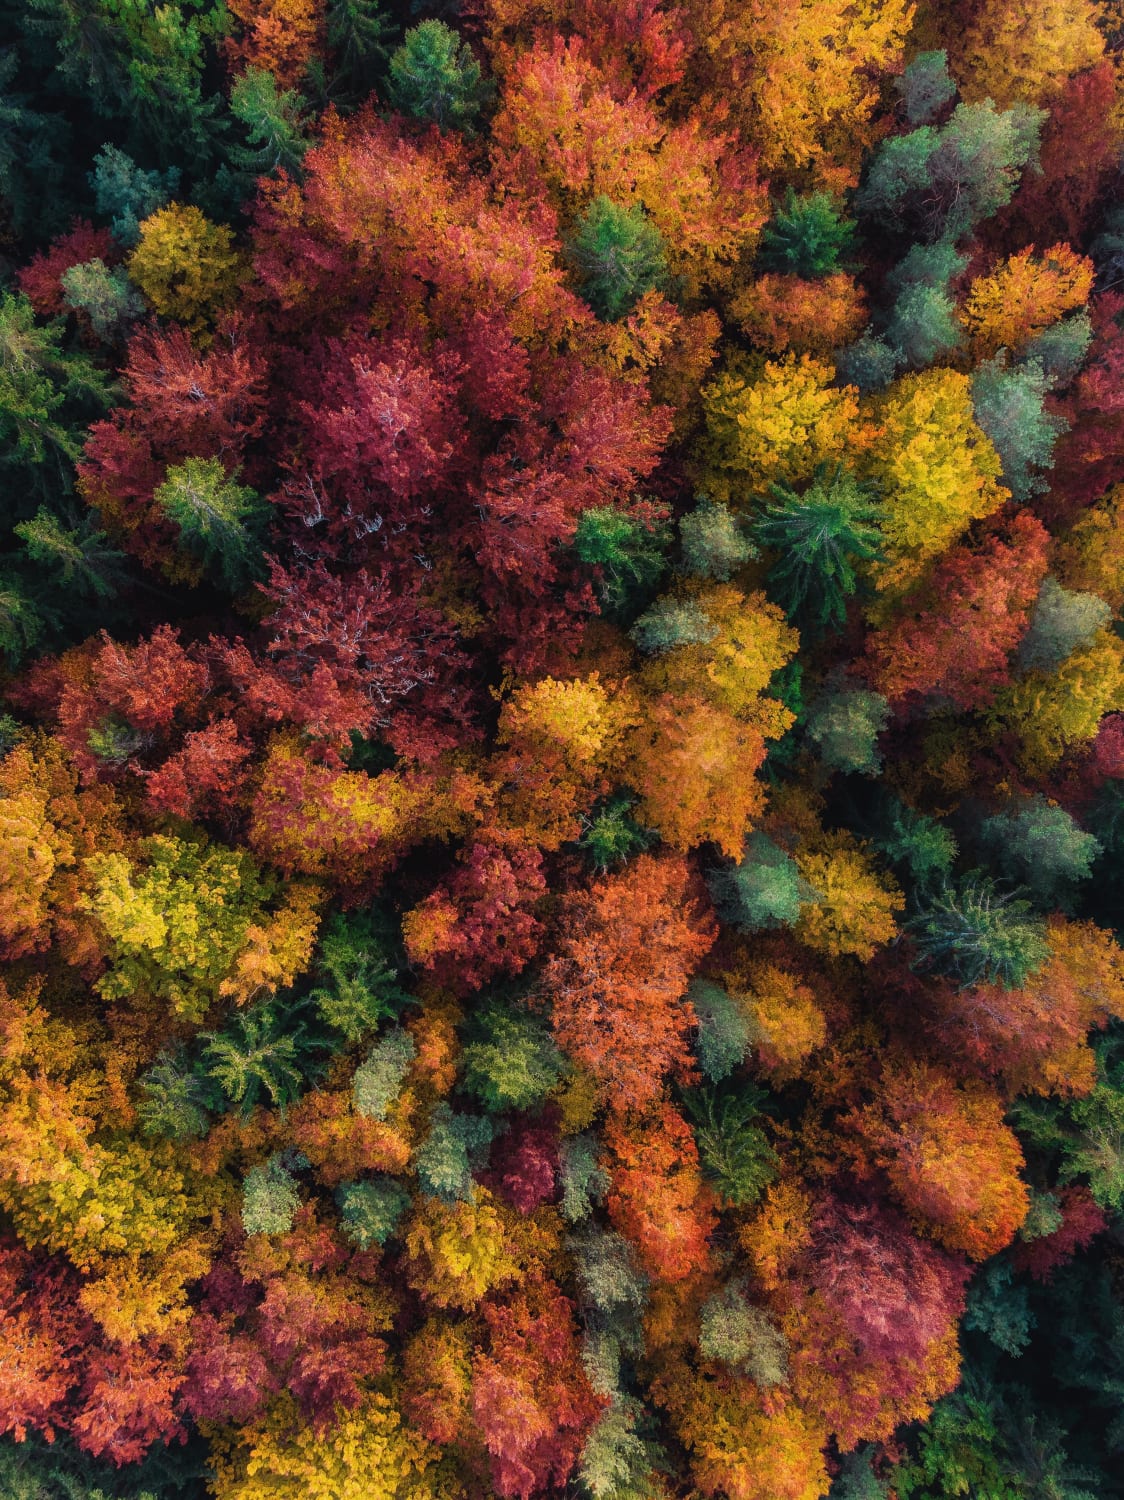 Autumn forest from a birds eye view. Nürnberg, Germany